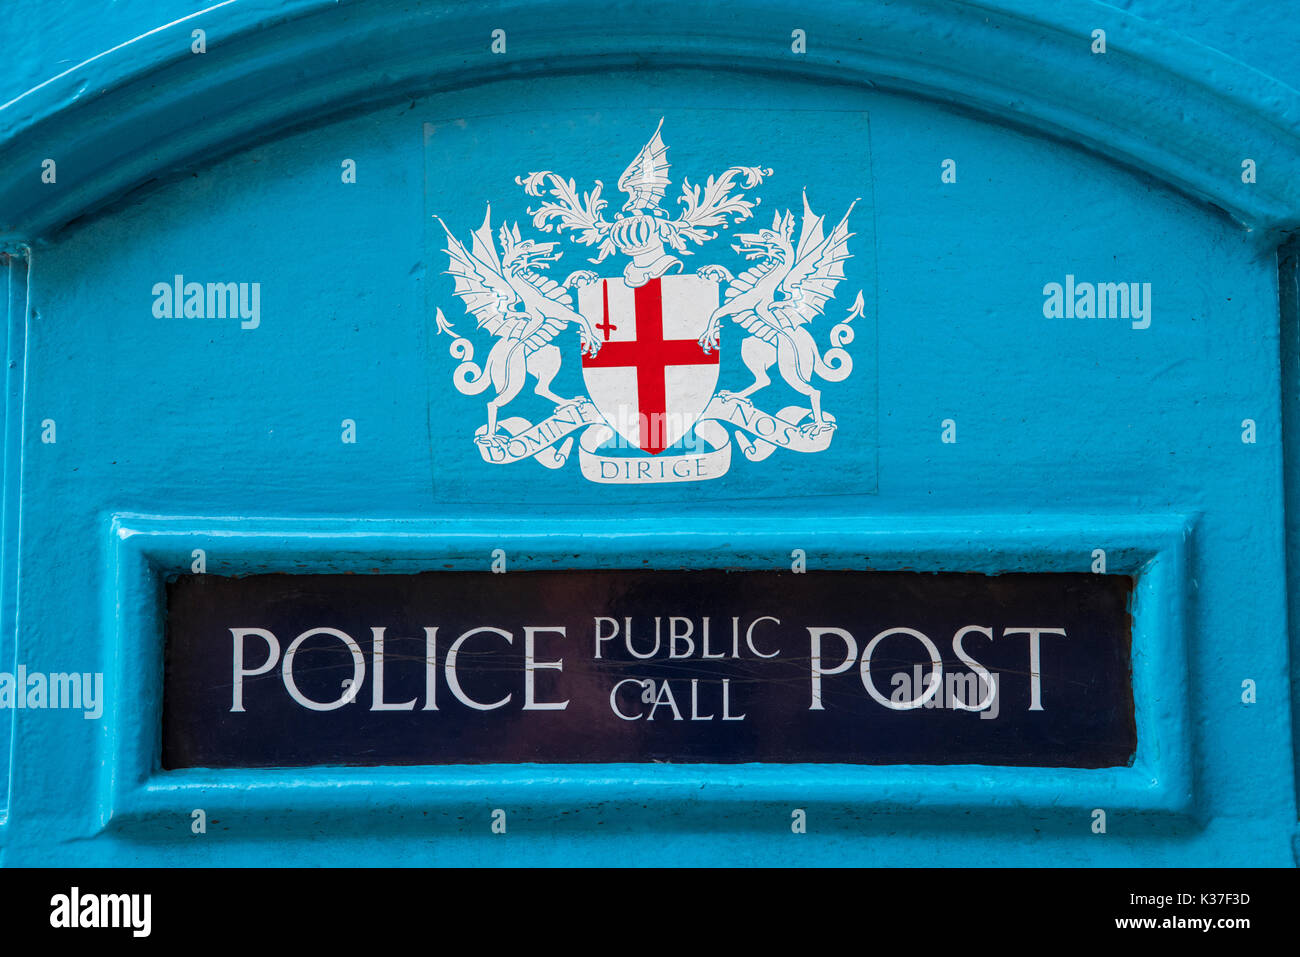 LONDON, UK - AUGUST 11TH 2017: Close-up detail of a City of London Police Public Call Post, on 11th August 2017. Stock Photo